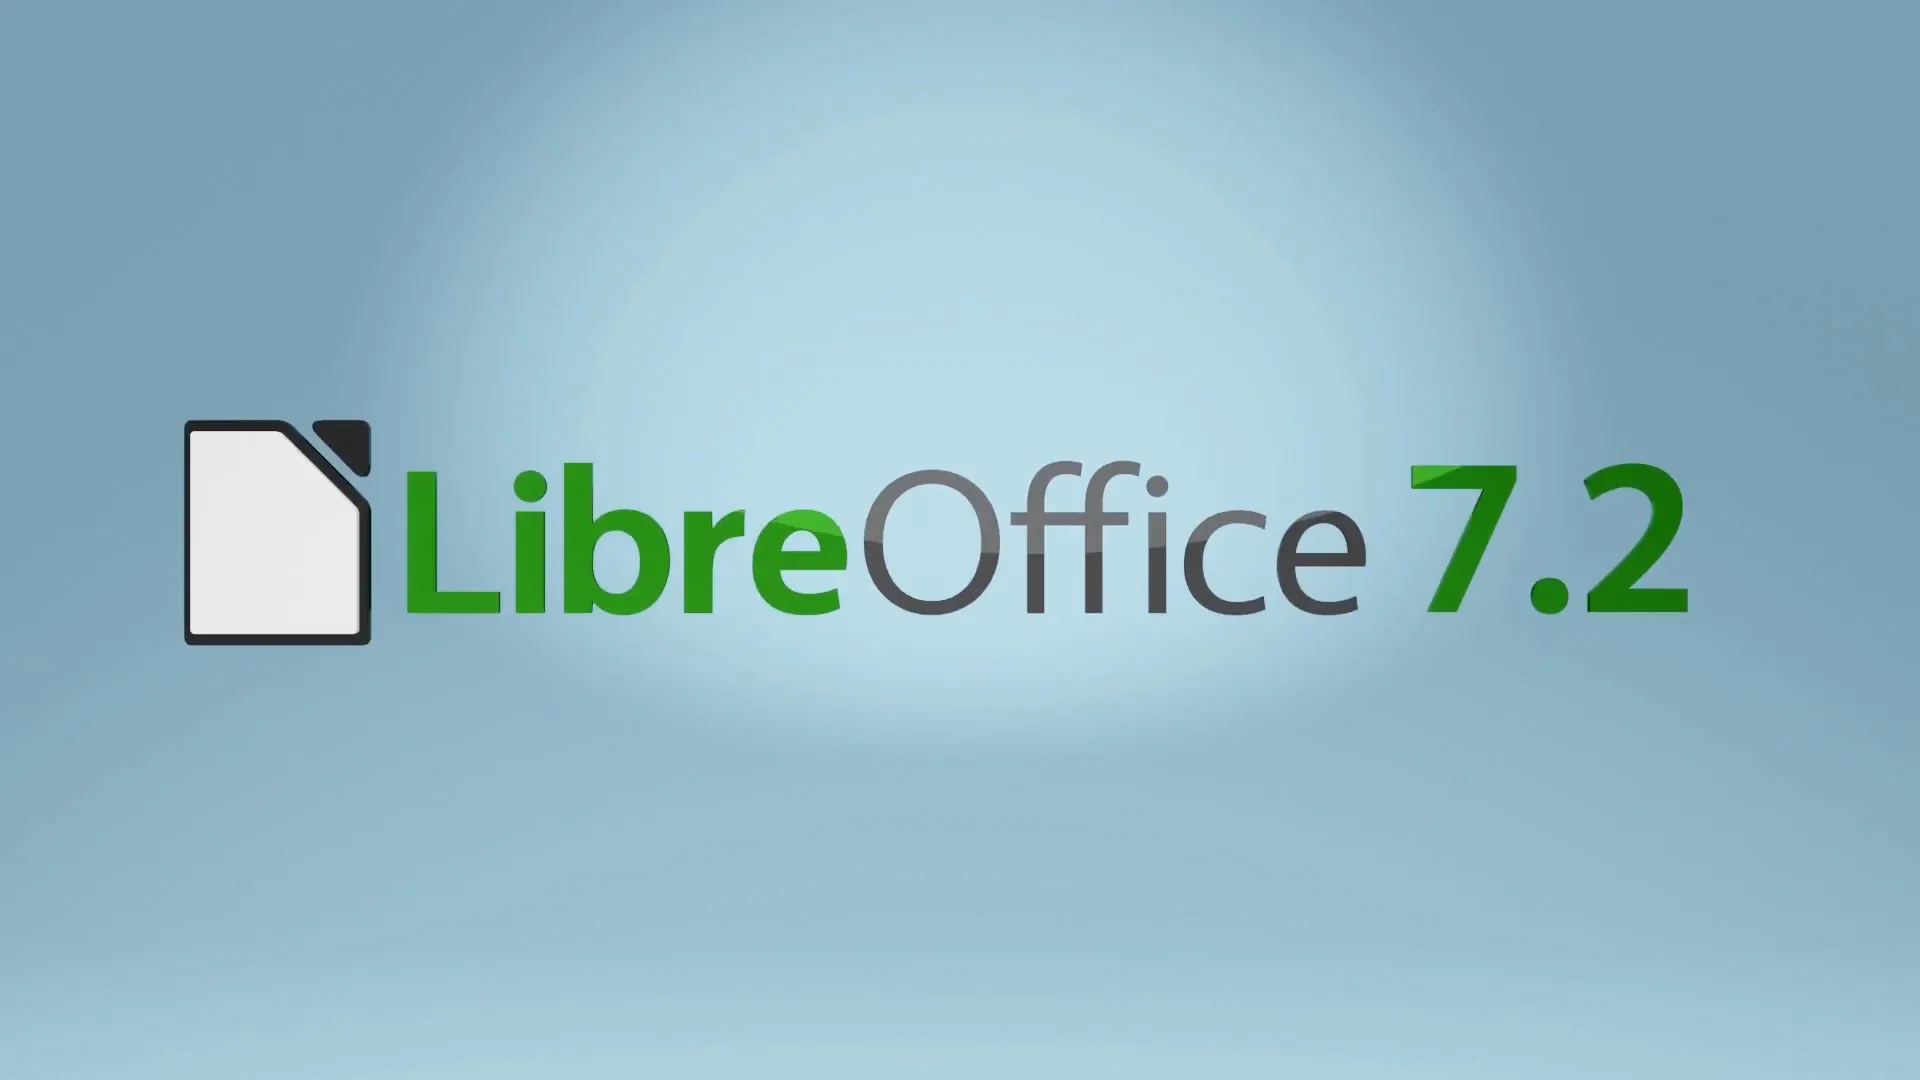 LibreOffice 7.2 Gets Last Update Before June 12th End-of-Life, Upgrade to LibreOffice 7.3